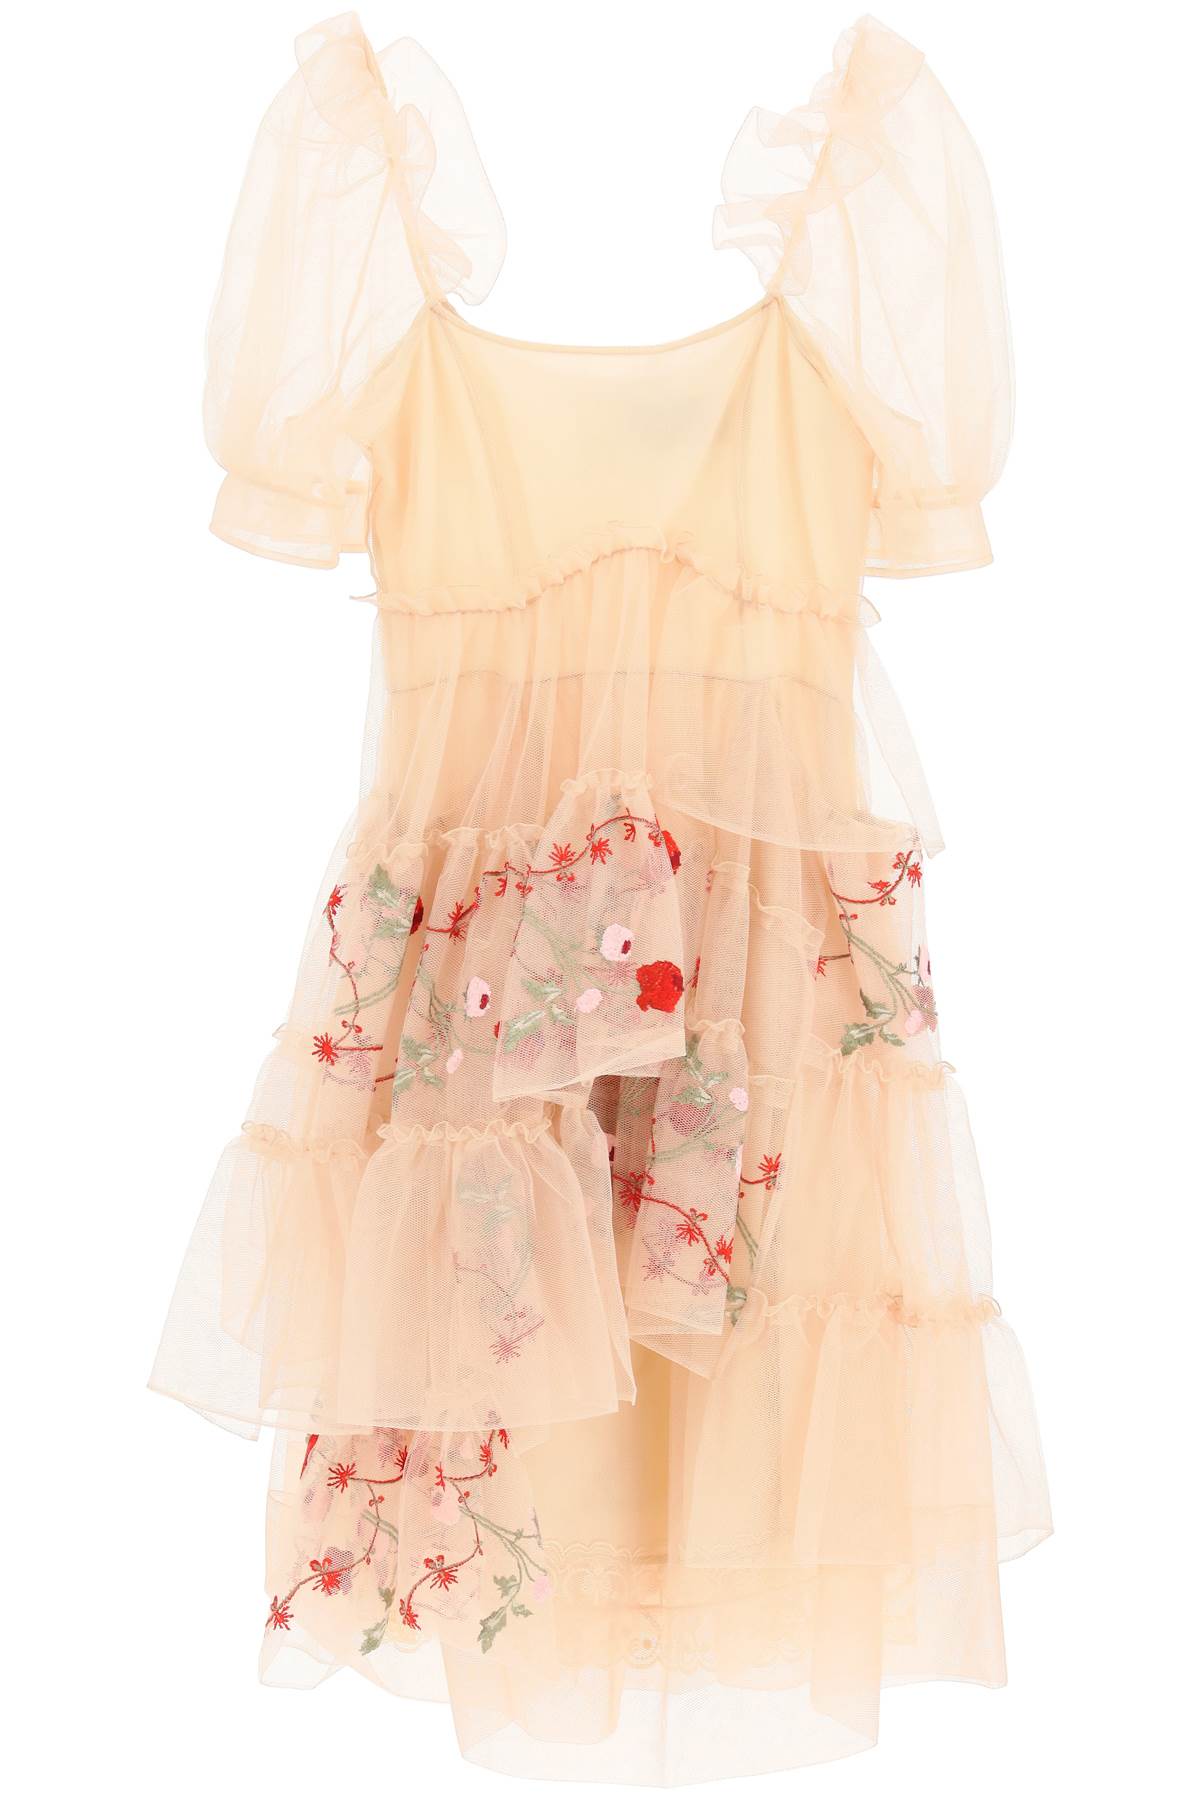 Simone Rocha Embroidered Tulle Dress